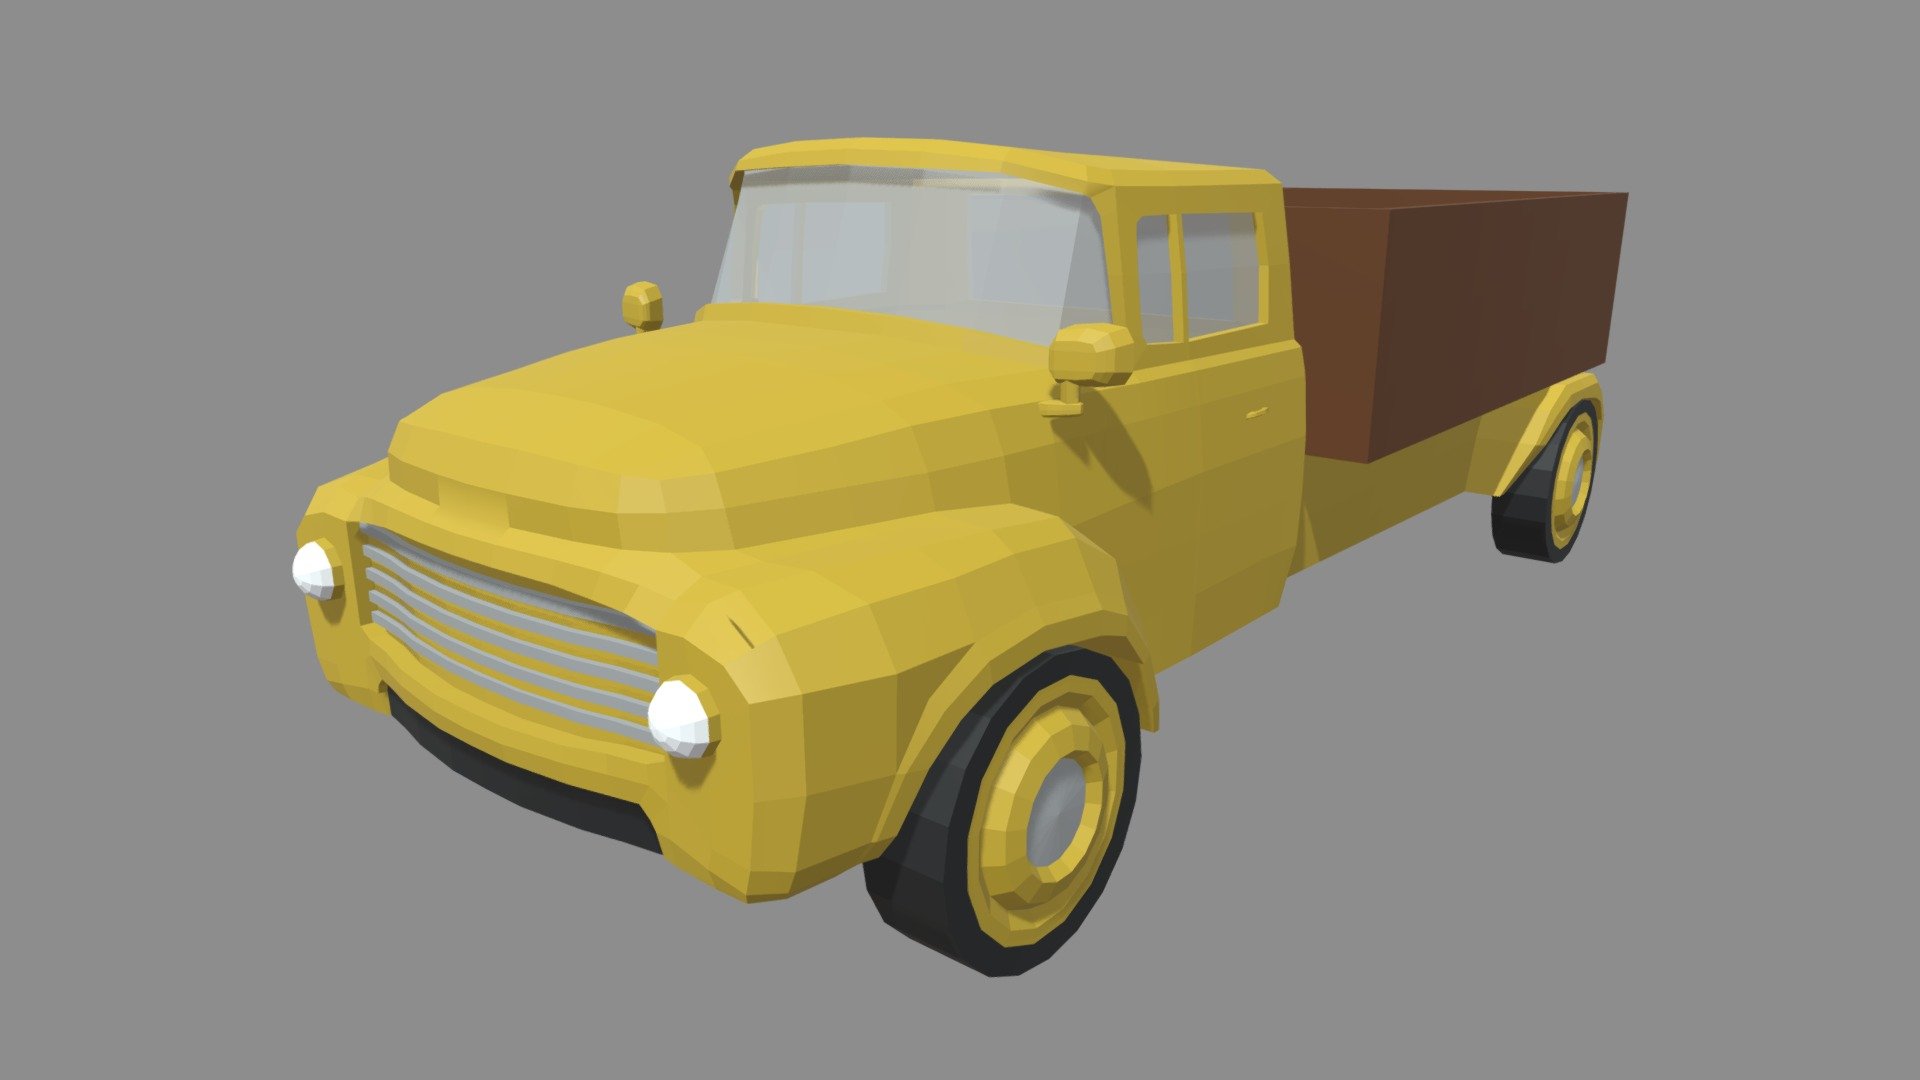 This model contains a Low Poly Truck 01 based on a truck which i modeled in Maya 2018. This model is perfect to create a new great scene with different low poly cars or low poly items. I will add a low poly car pack soon on my profile, keep checking.

There is an automatic UV and all different materials so you can change all the colors as you want.

Tris: 5518 // Verts: 2830

The model is ready as one unique part and ready for being a great CGI model and also a 3D printable model, i will add the STL model, tested for 3D printing in Ultimaker Cura. I uploaded the model in .mb, ,blend, .stl, .obj and .fbx.

If you need any kind of help contact me, i will help you with everything i can. If you like the model please give me some feedback, I would appreciate it.

Don’t doubt on contacting me, i would be very happy to help. If you experience any kind of difficulties, be sure to contact me and i will help you. Sincerely Yours, ViperJr3D - Low Poly Truck 01 - Buy Royalty Free 3D model by ViperJr3D 3d model